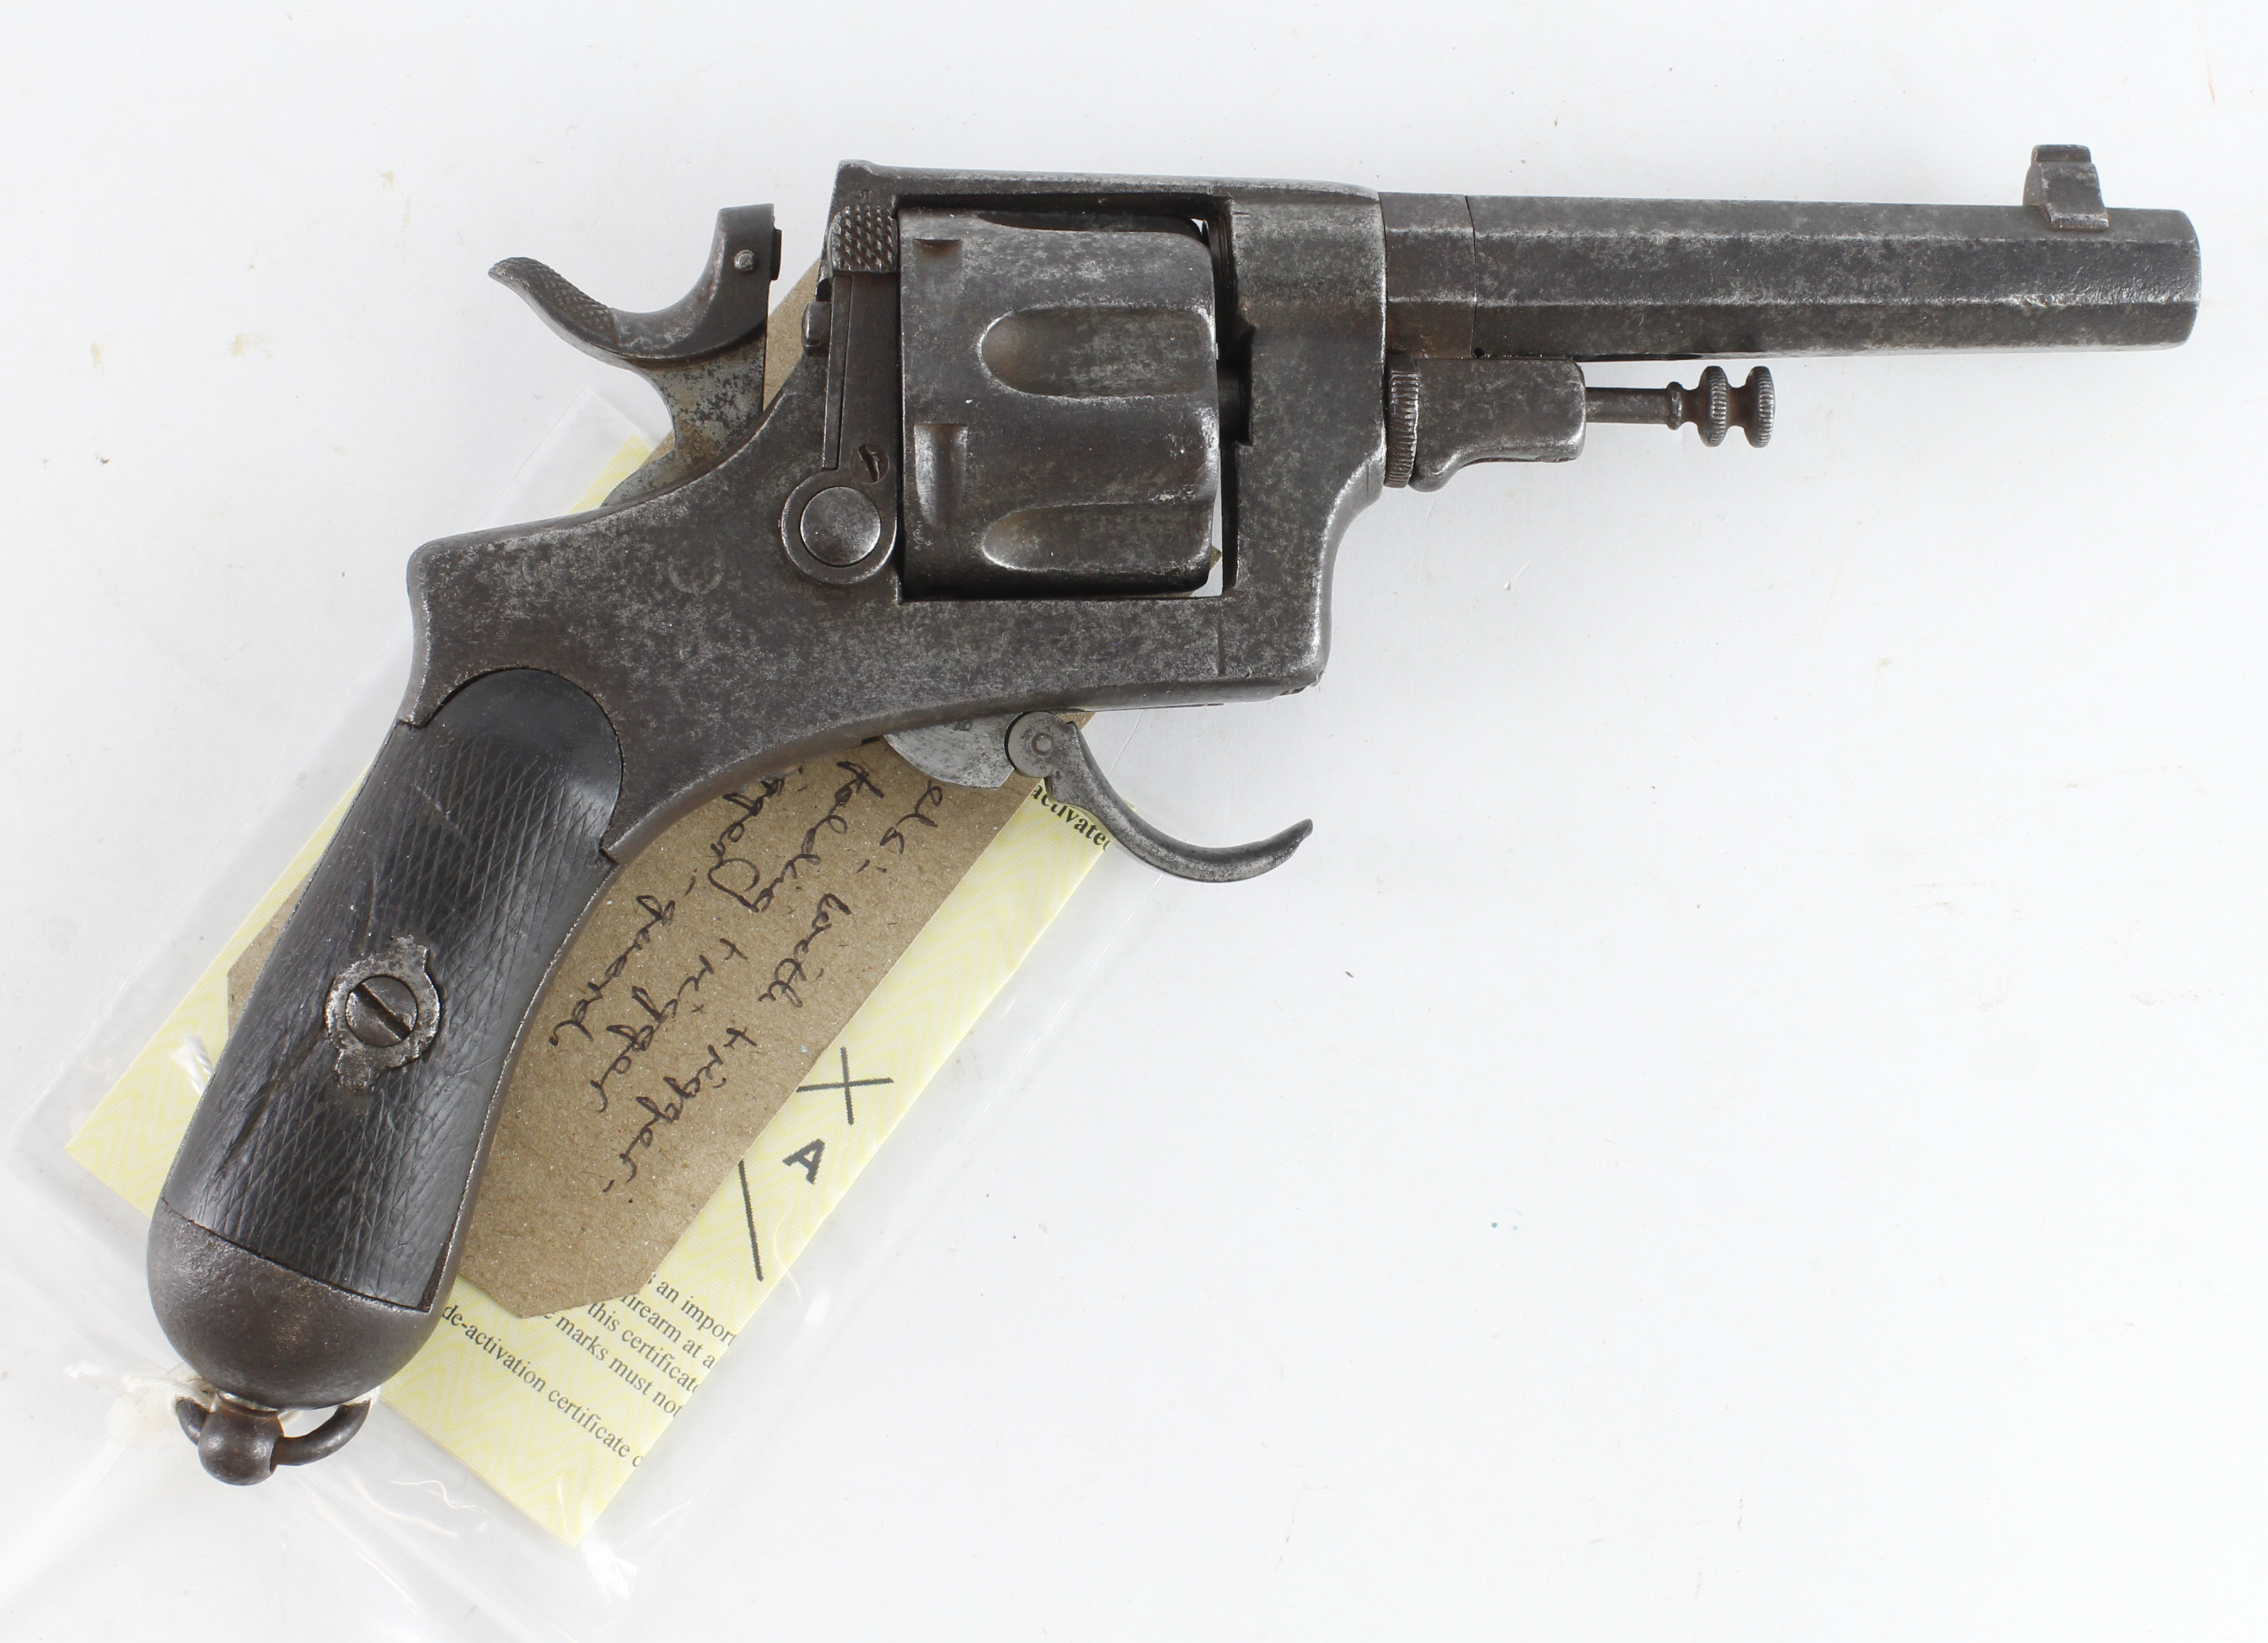 Italian Great War Revolver 10.35mm Bodeo with folding trigger, handworn chequered grips, frame